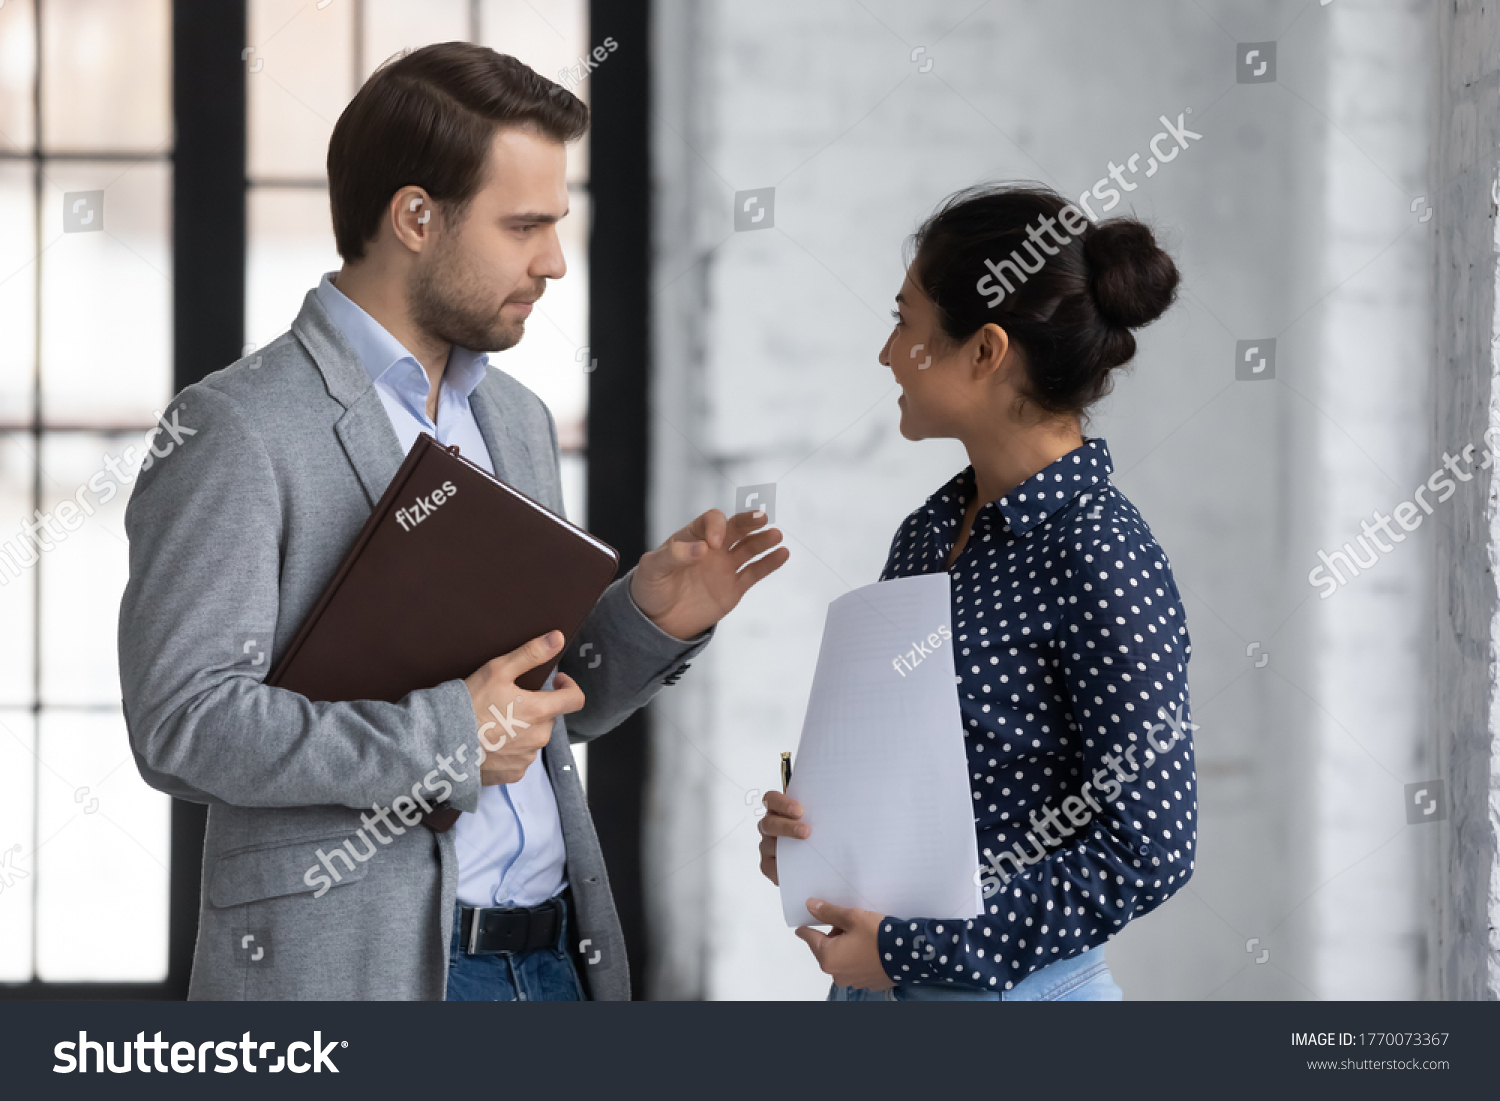 Diverse office workers colleagues met standing in office and talking, friendly Indian woman communicates with Caucasian man discussing project ideas, 2 executives having pleasant conversation concept #1770073367